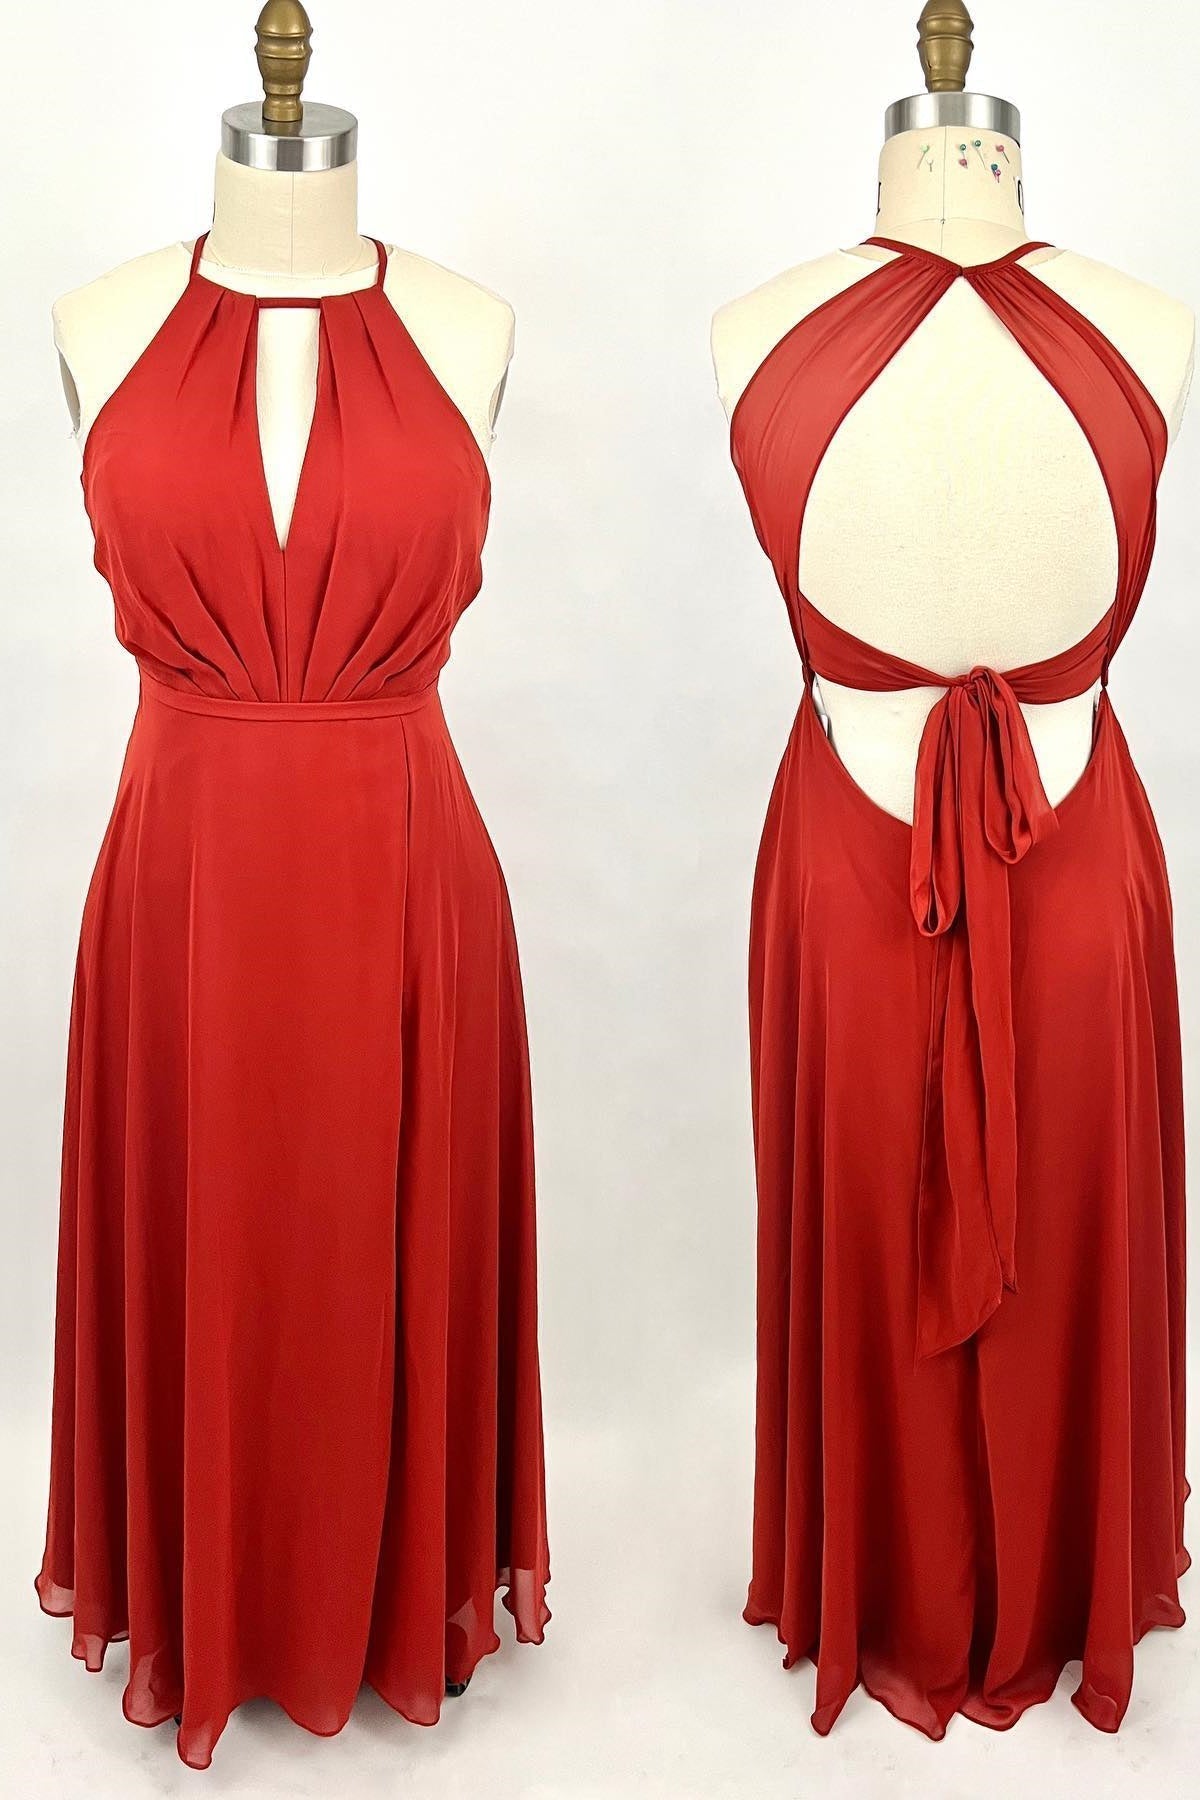 Formal Dresses Websites, Scoop Red A-line Chiffon Long Bridesmaid Dress with Open Back